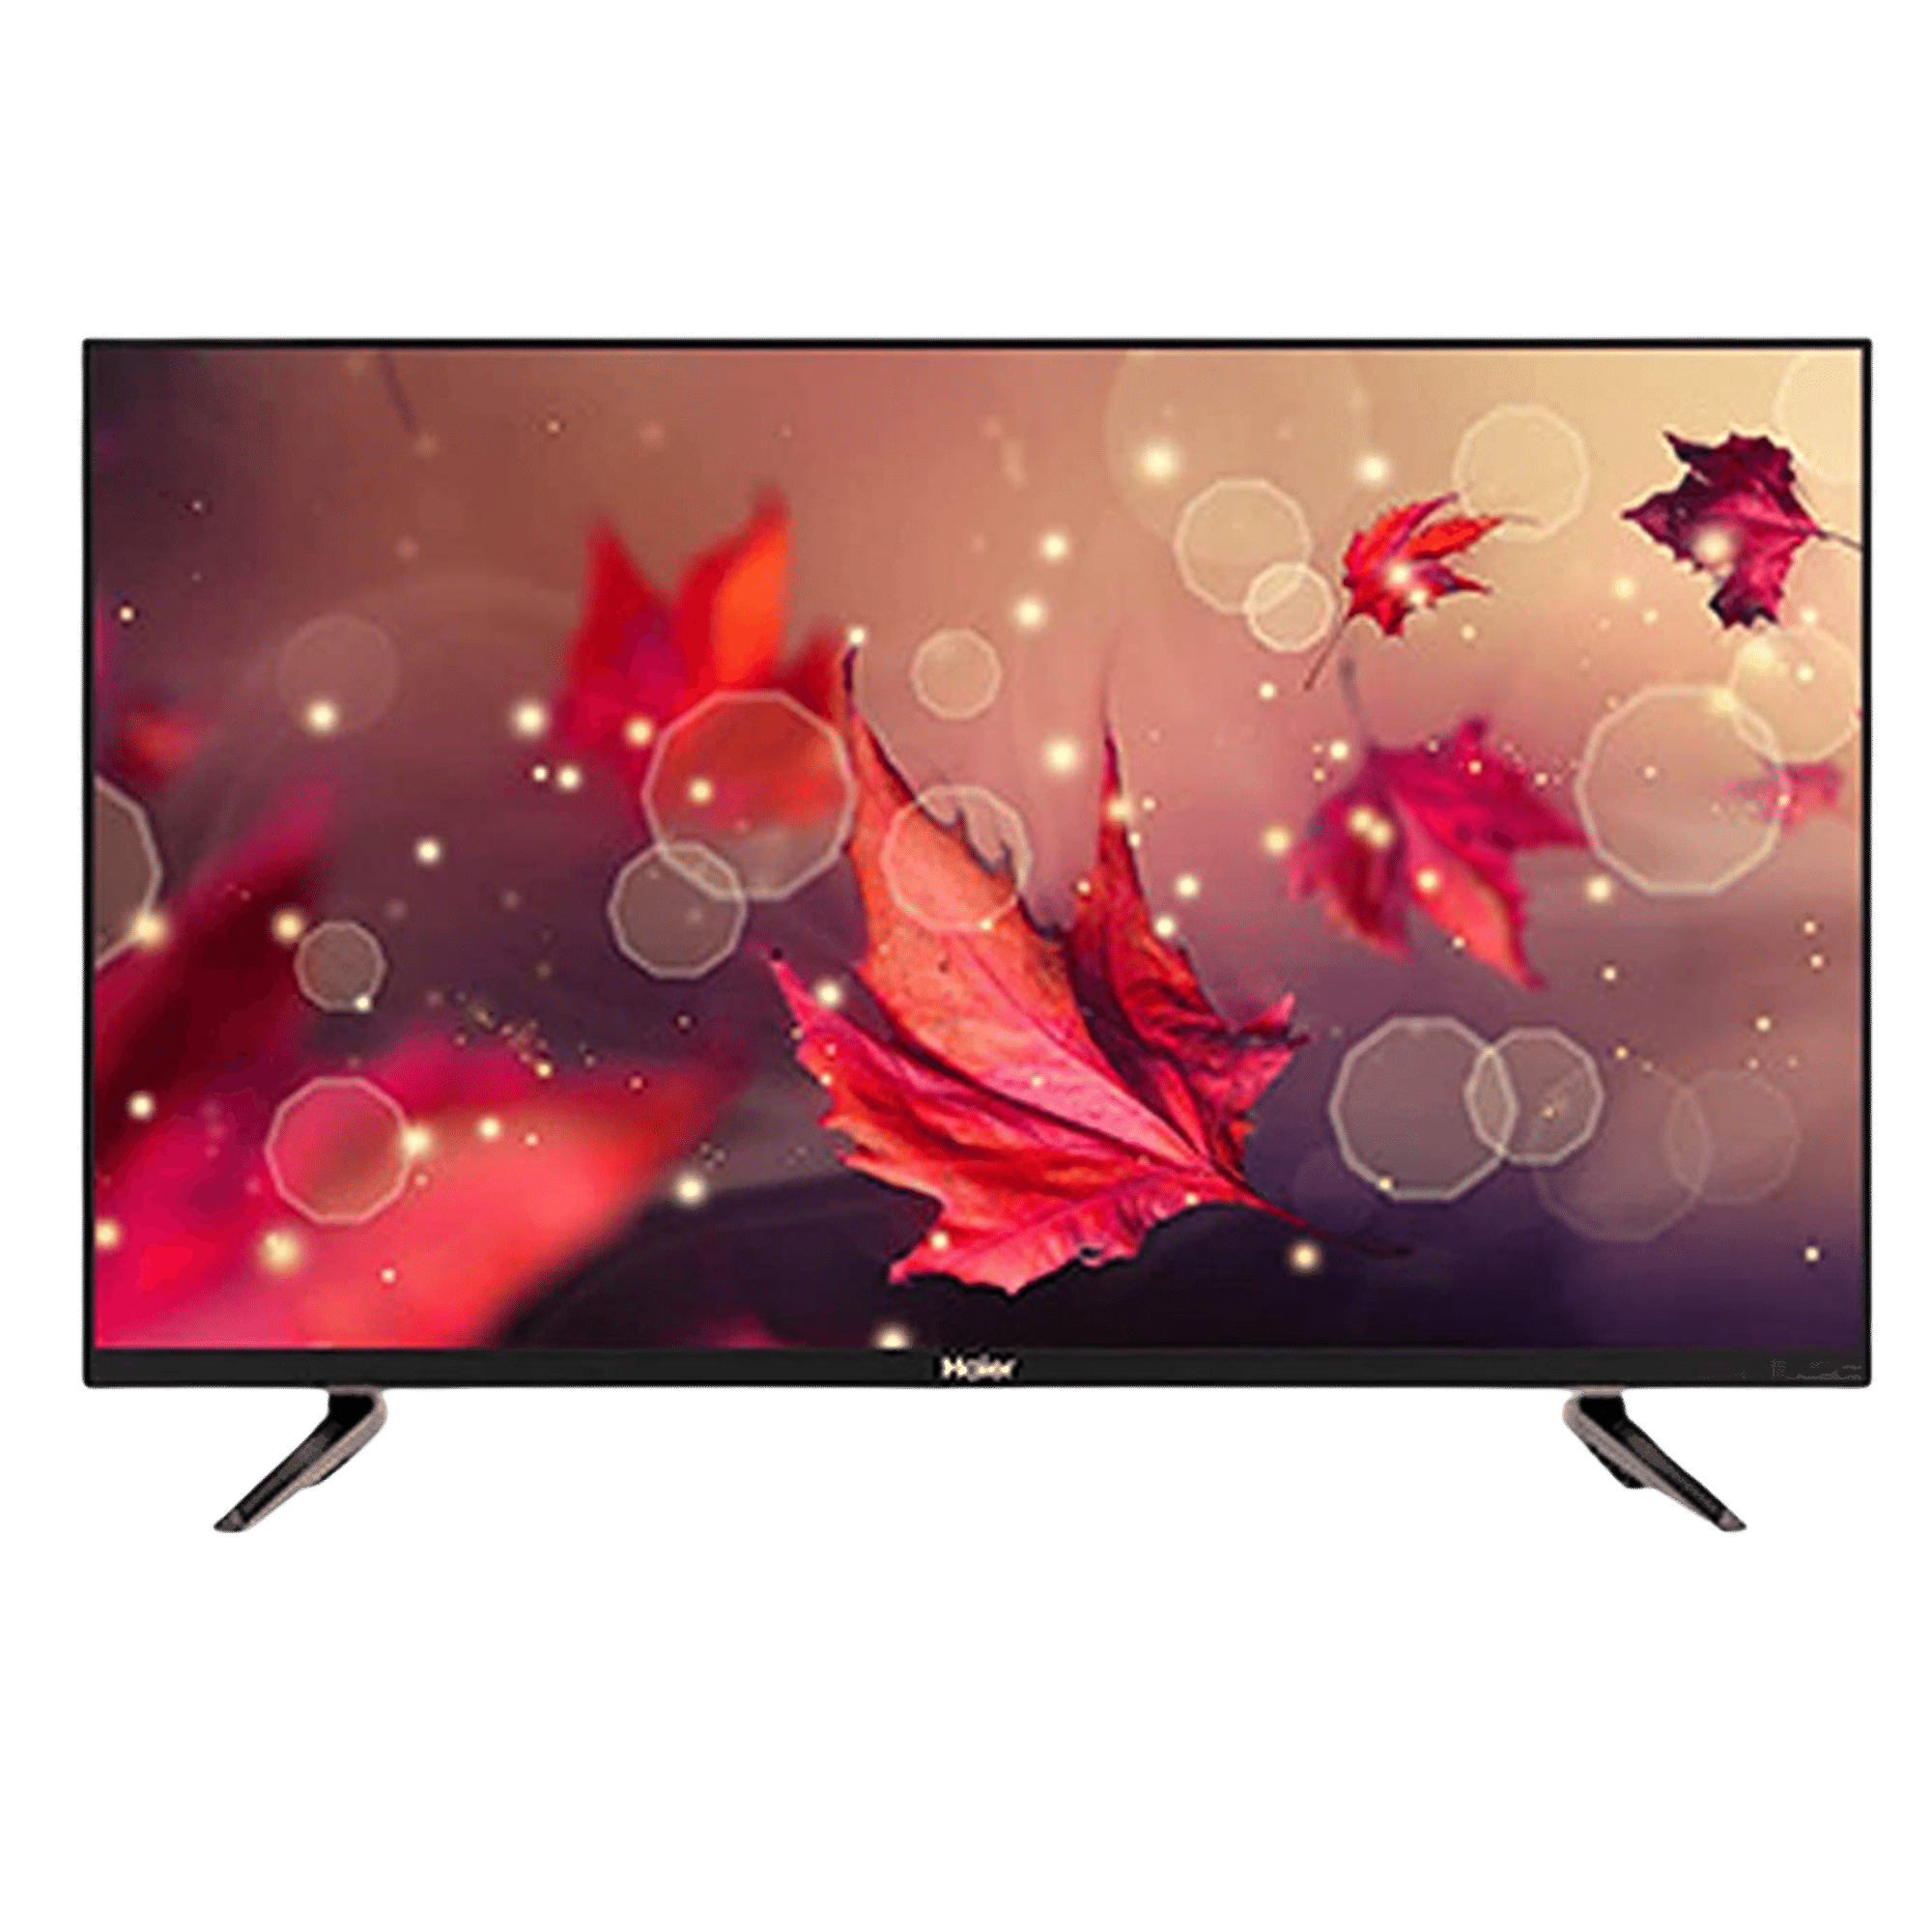 Haier 39 Inch LED HD Ready TV (LE39B8550) Online at Lowest Price in India